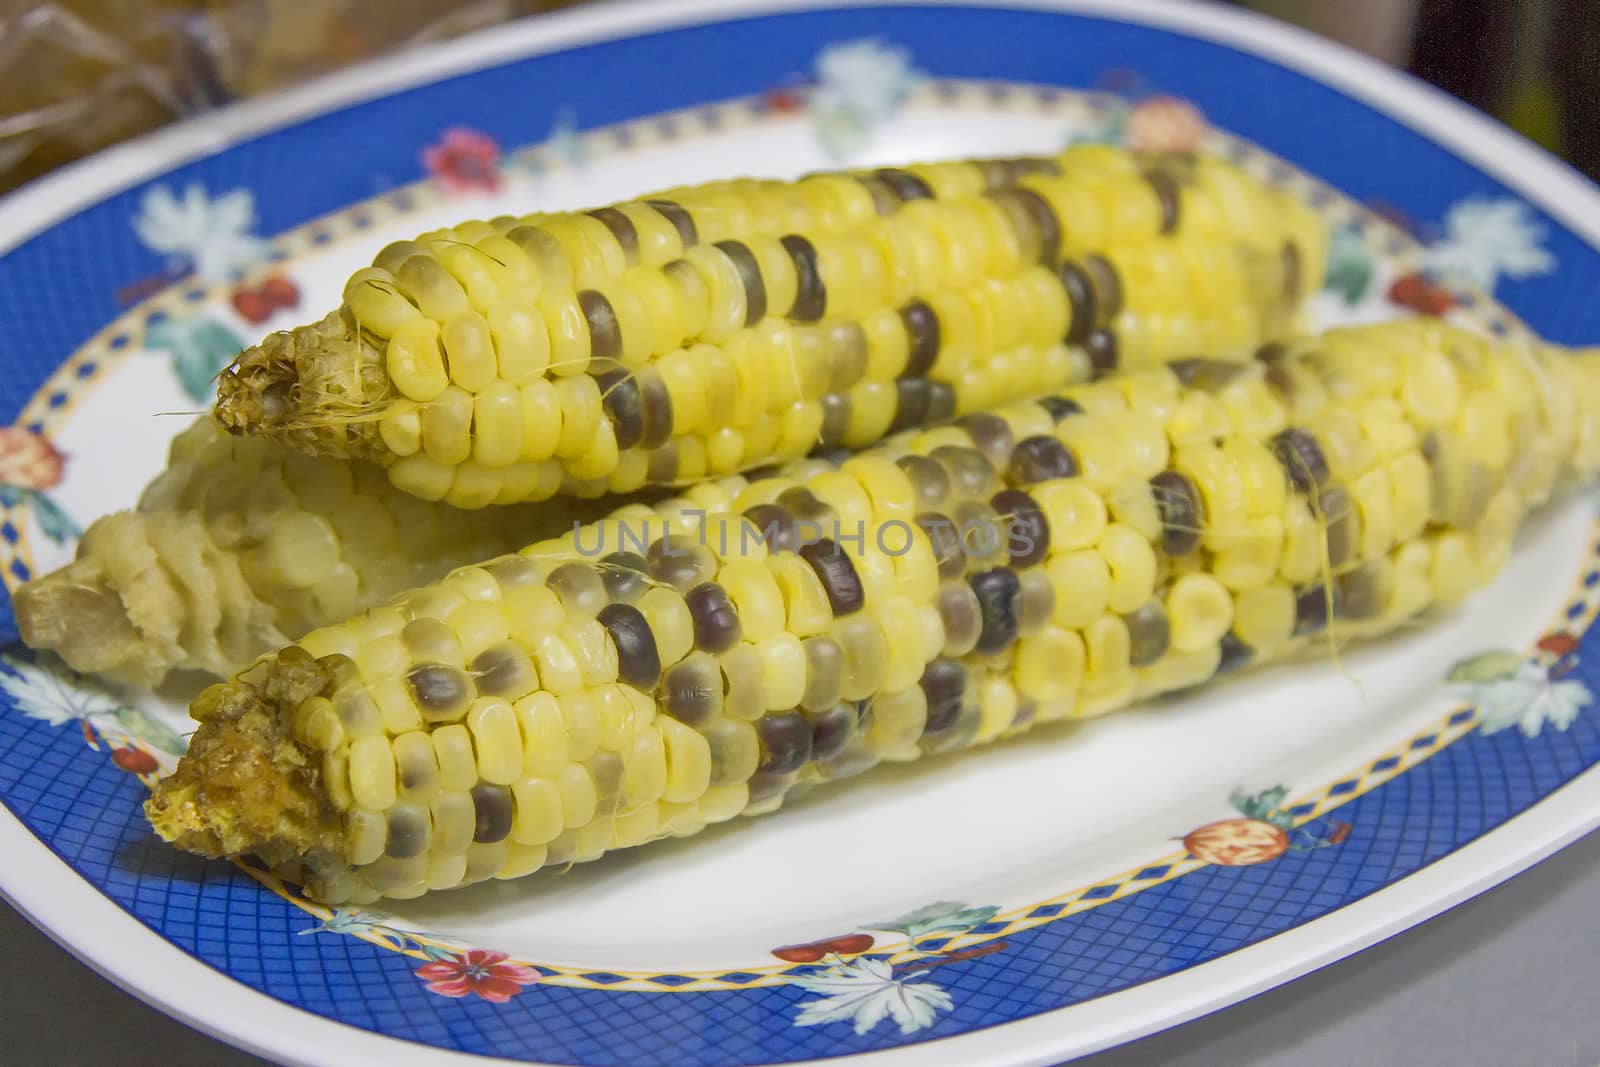 Corn boiled in a plate